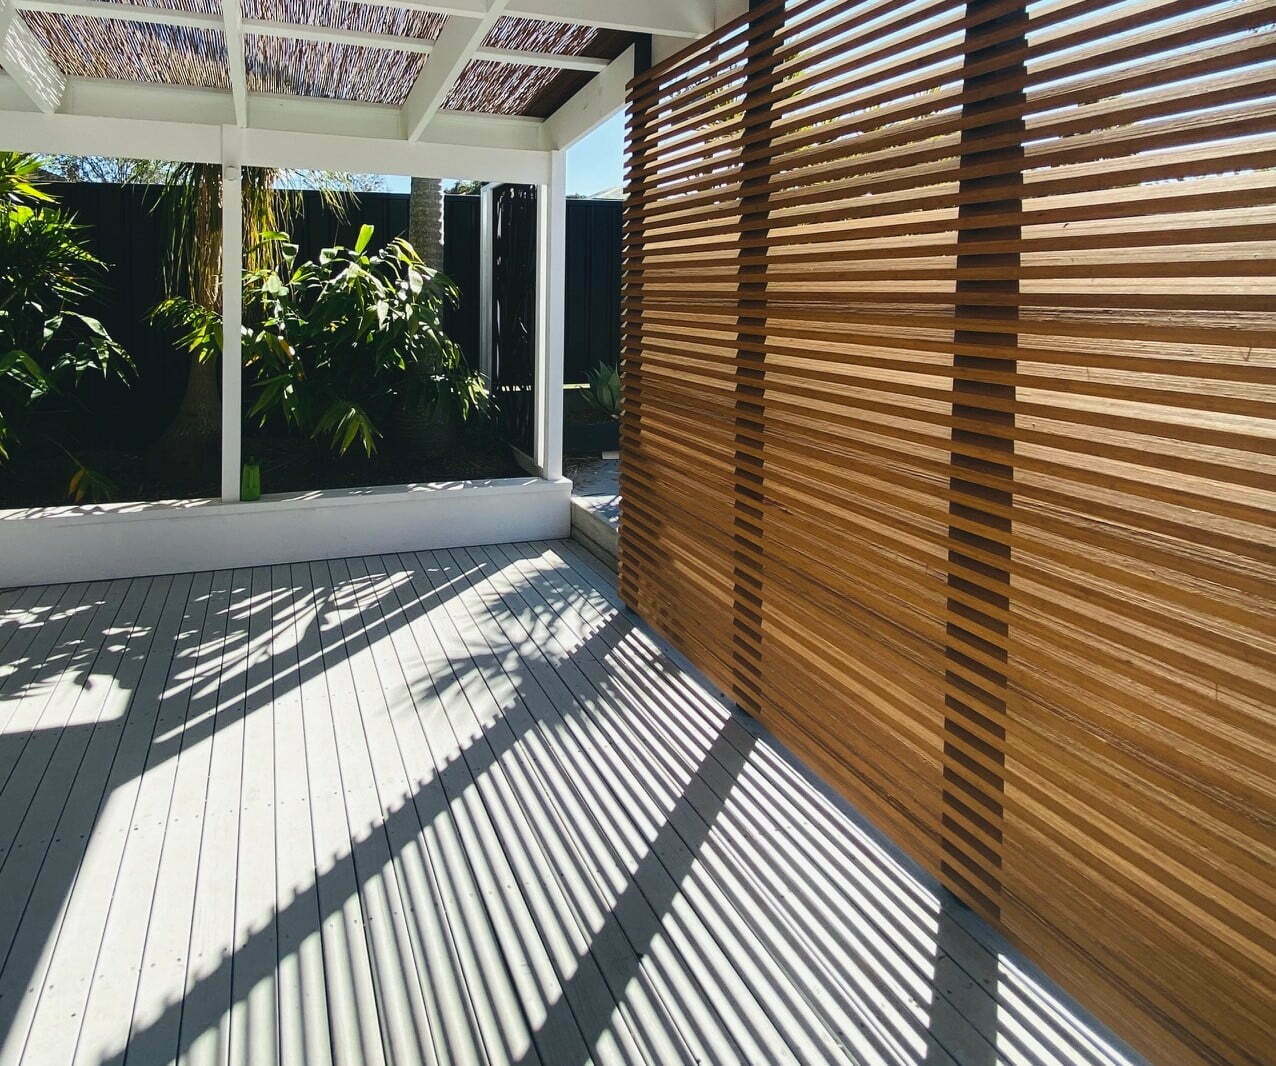 Outdoor Area With Natureed and Laminated Bamboo Slats